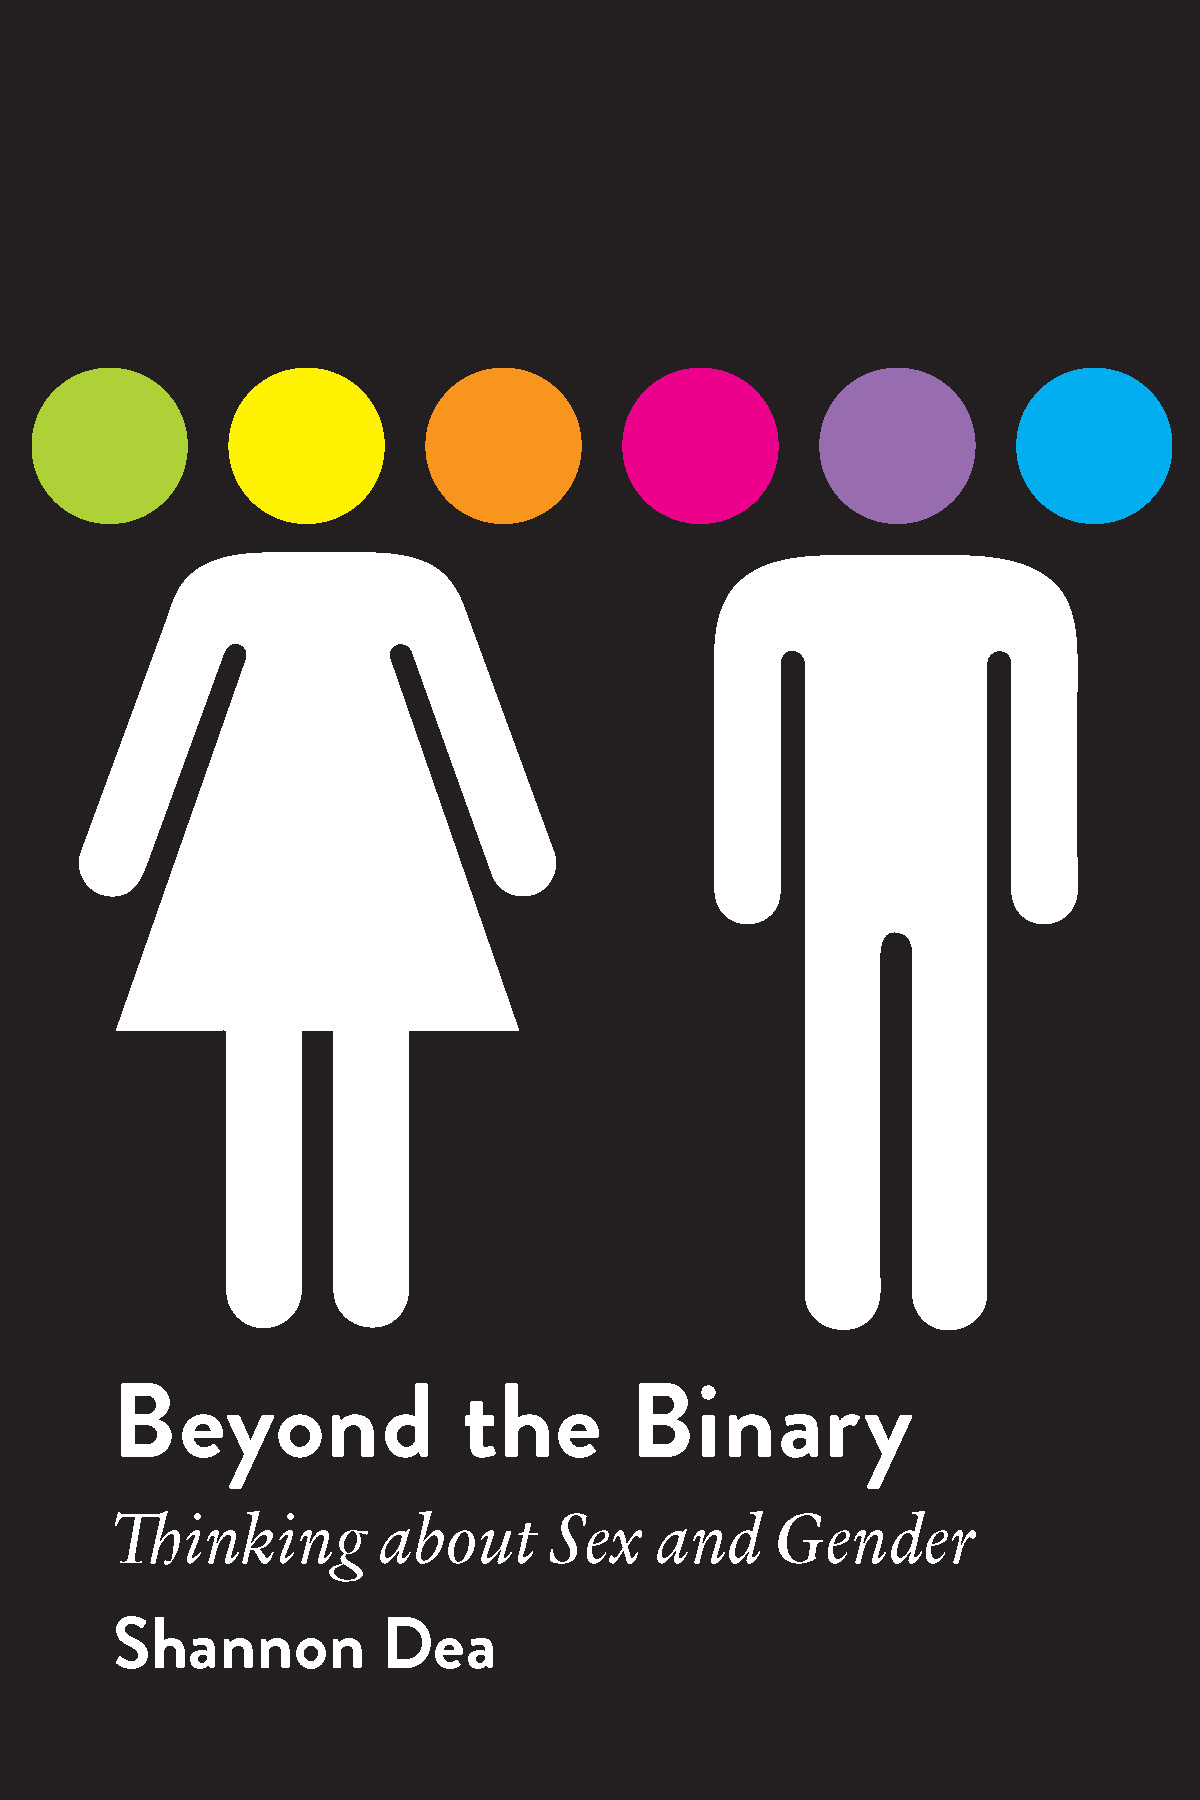 research about gender binary